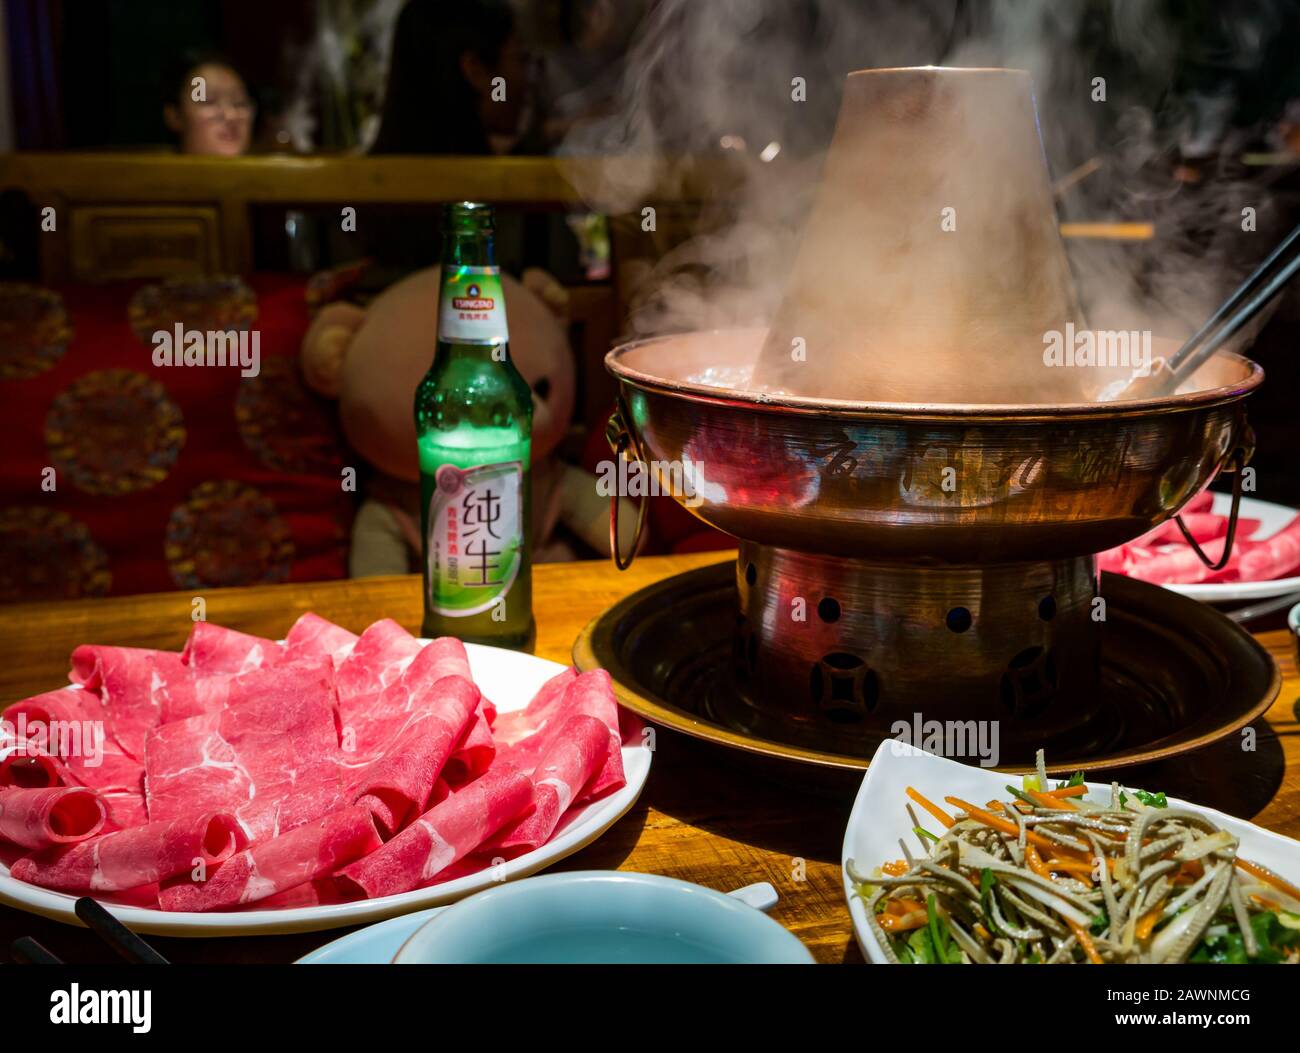 Mongolian hotpot with meat slices served at restaurant table with local Tsingtao beer, Xi Cheng Hutong District, Beijing, China, Asia Stock Photo